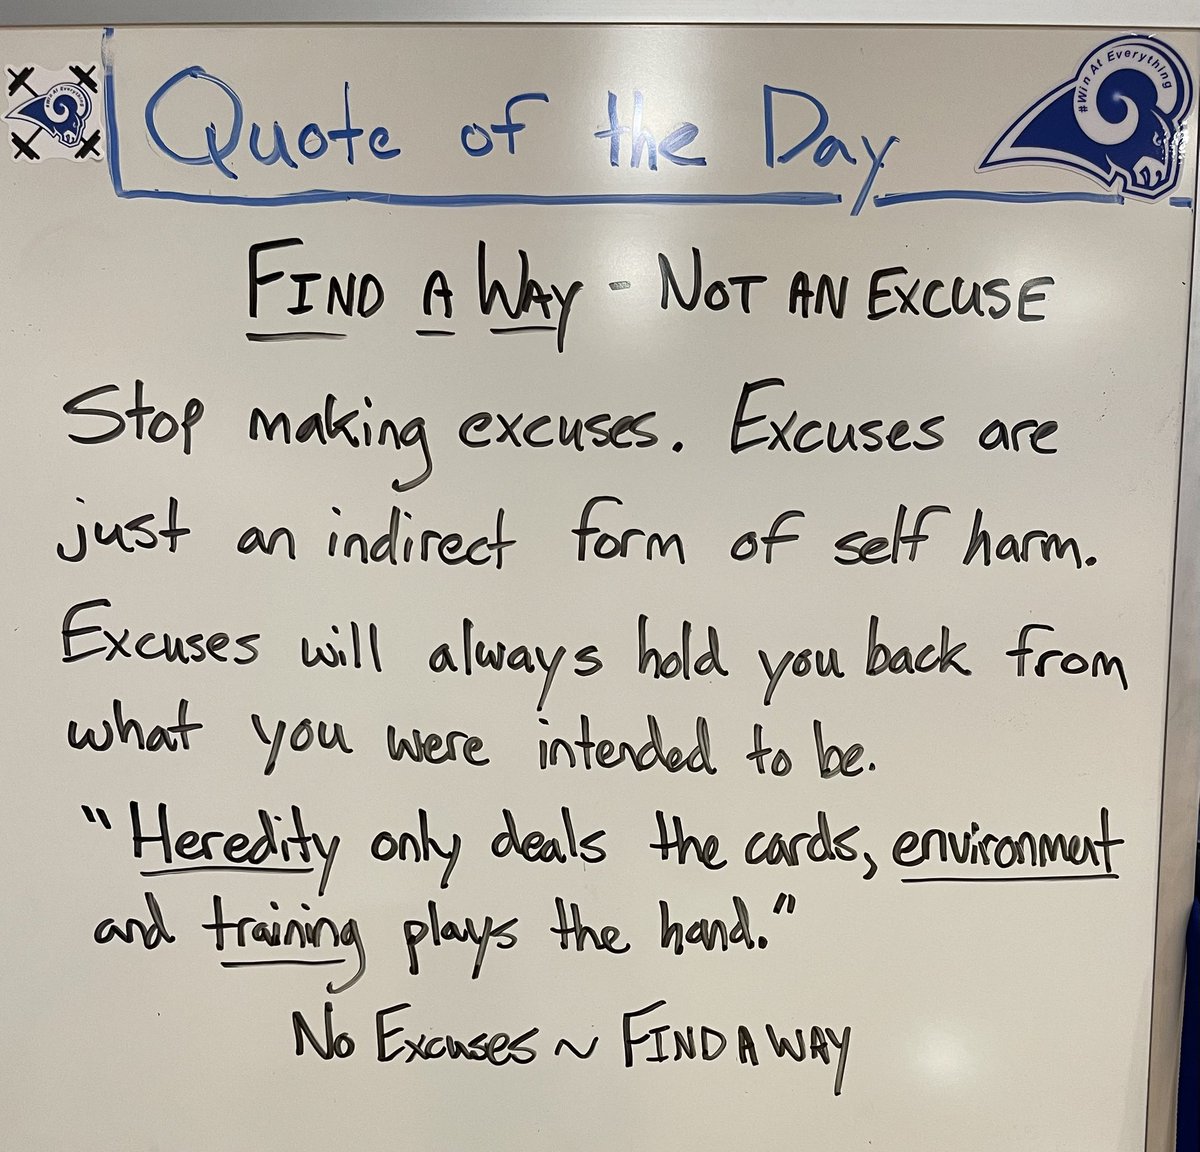 Some folks have an excuse 4 everything. 1 thing I’ve always found to be true is that those who really want to make something happen, typically do. Those who don’t find an excuse & fight to justify it. You quickly become what you train yourself to be. Find a way or find an excuse